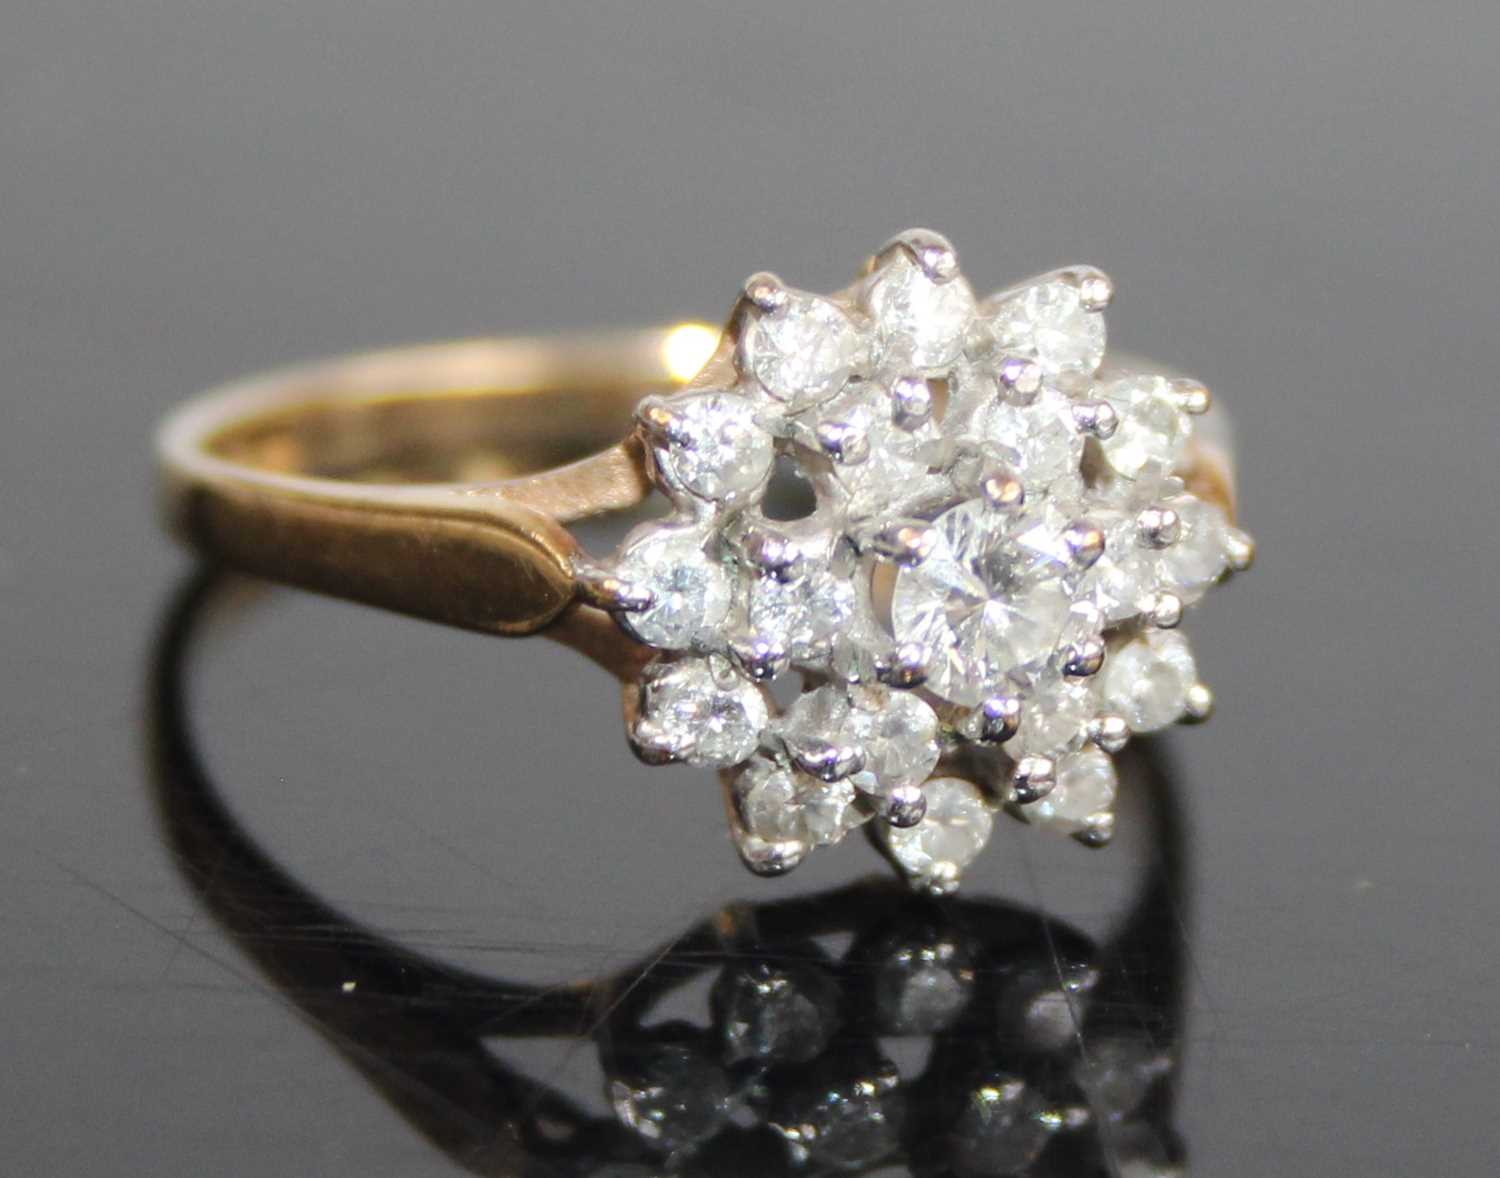 A 9ct yellow and white gold diamond circular cluster ring, comprising 19 round brilliant cut